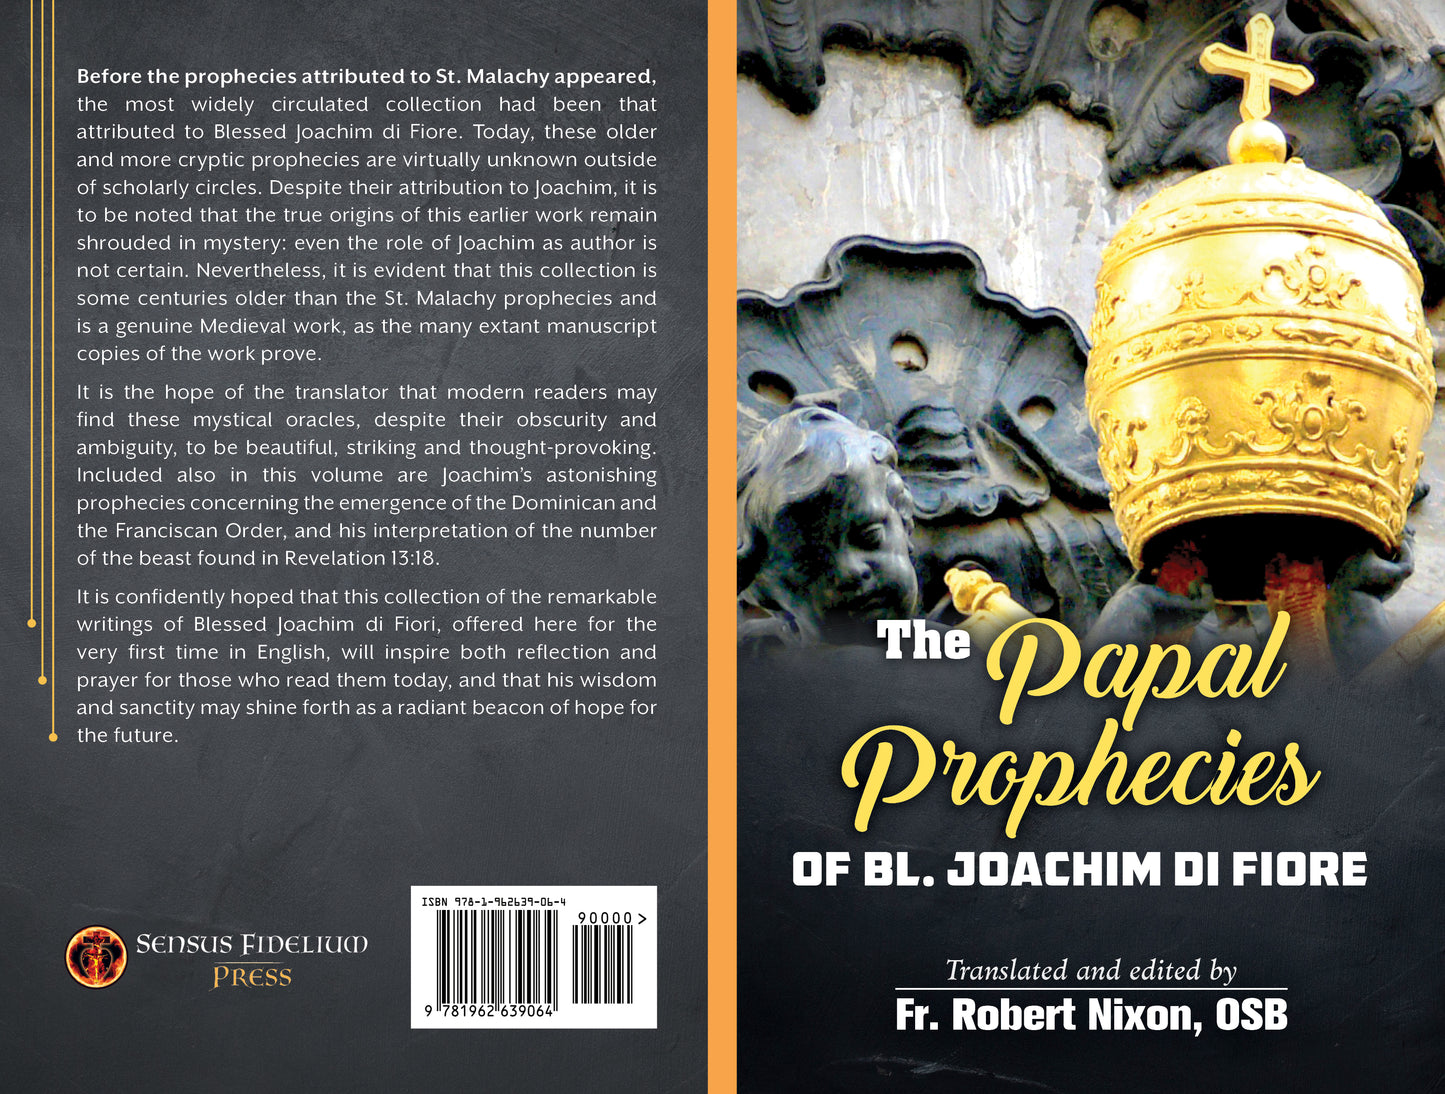 The Papal Prophecies of Blessed Joachim di Fiore